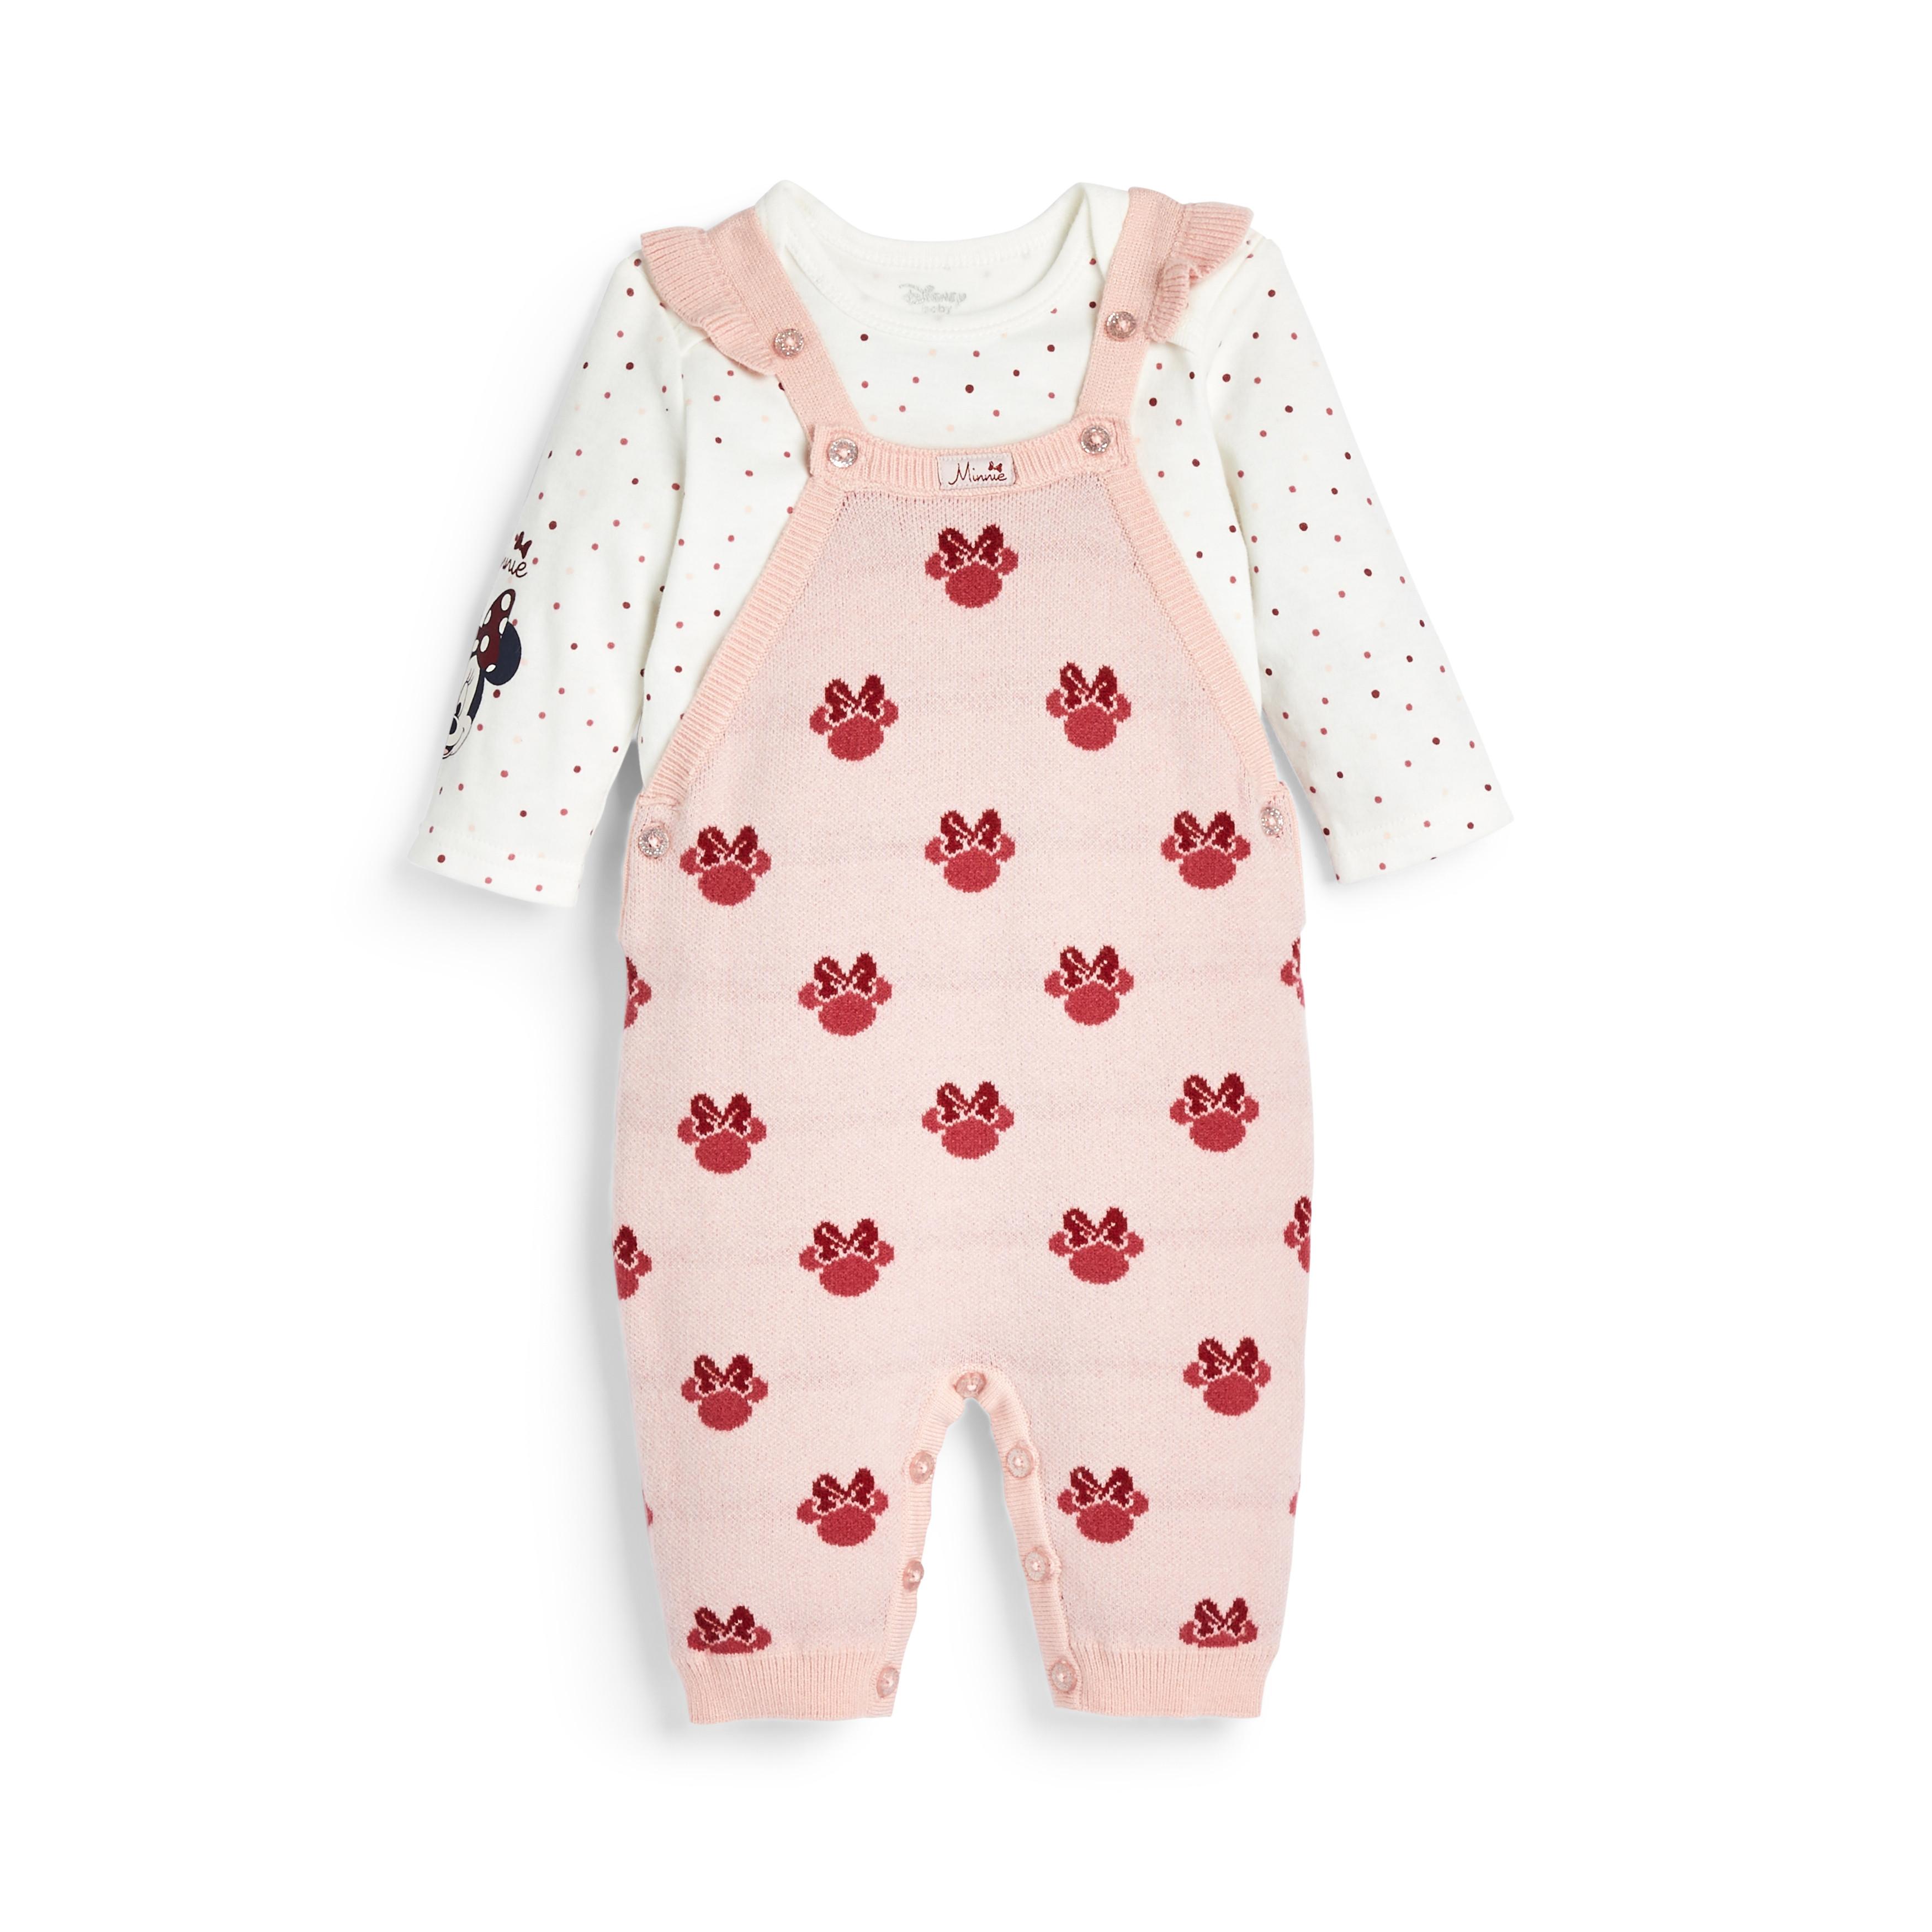 BRAND NEW EX-PRIMARK BABY GIRLS MINNIE MOUSE GREY PLAYSUIT AGES 0-3,3-6,6-9 MNTH